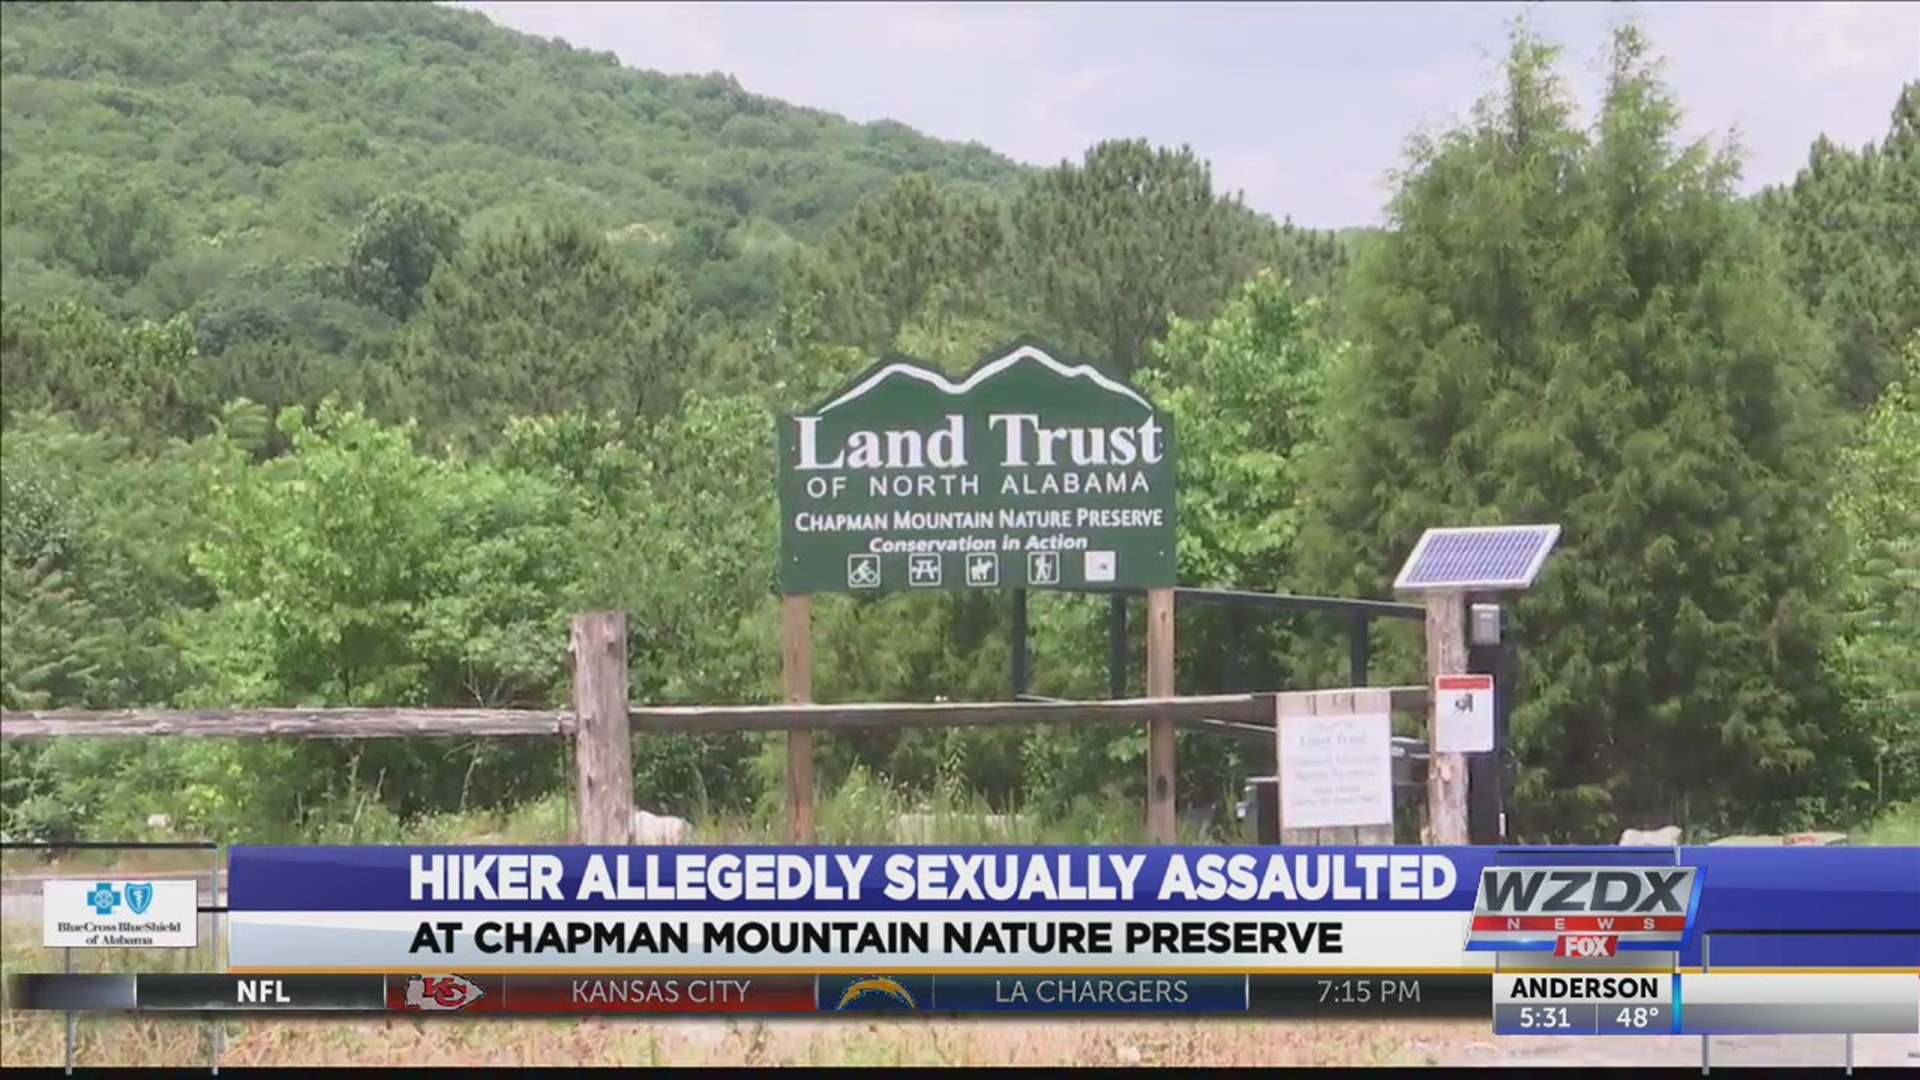 In a Facebook post Monday, Nov. 18, the Land Trust of North Alabama stated they found out about an alleged sexual assault that happened at the preserve and reached out to police about what they could do to make preserves safer.